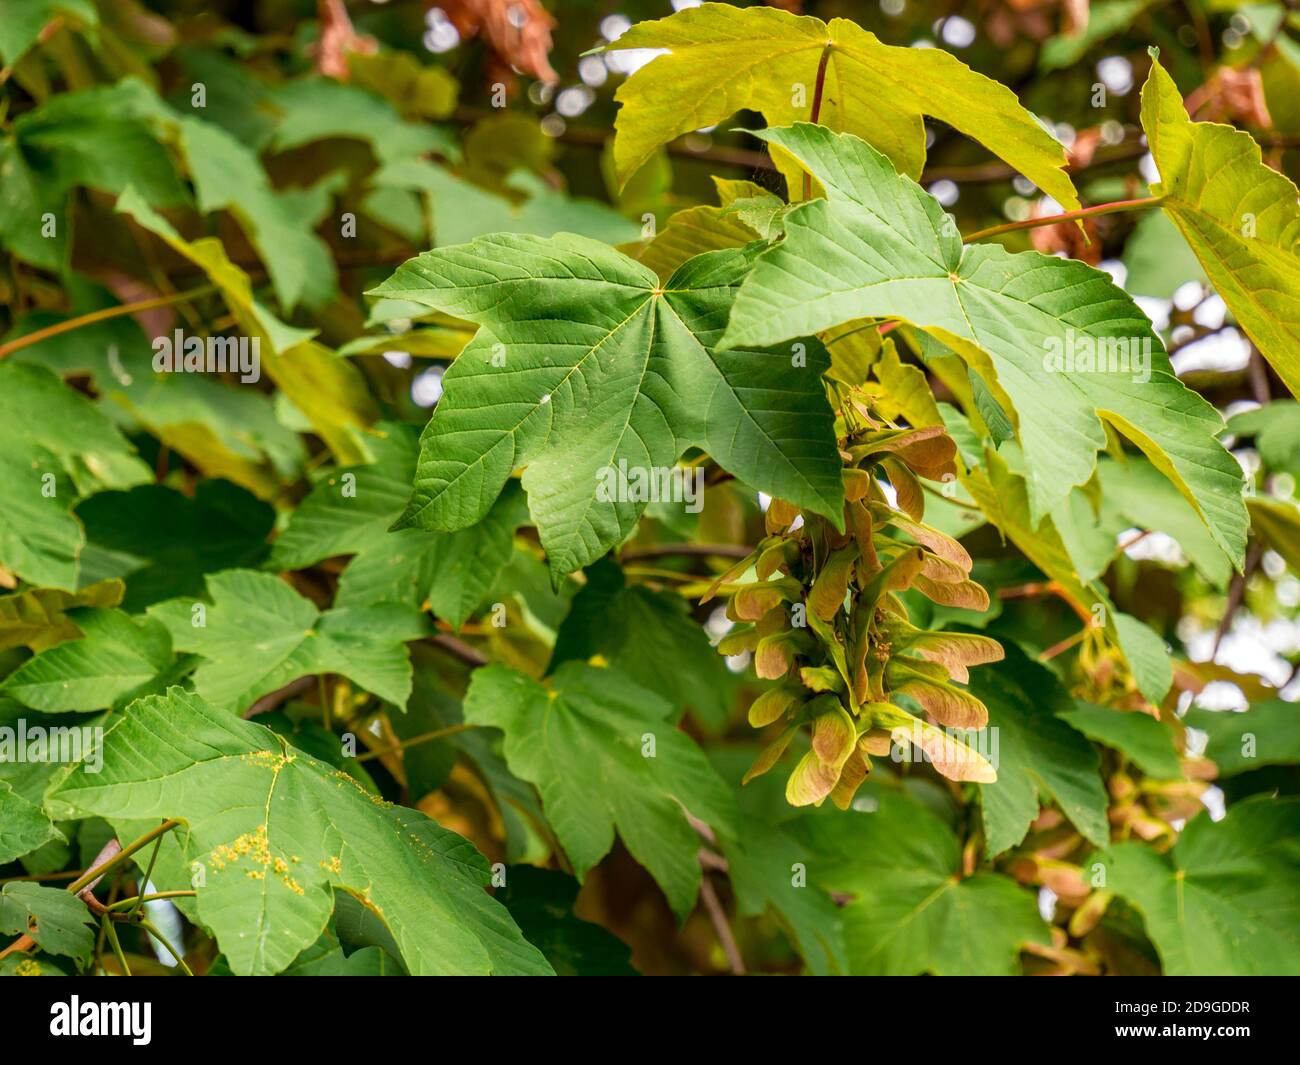 Sycamore Tree(Acer pseudoplatanus) - View of two-leaved seeds(diachenium) under the leaves. Stock Photo